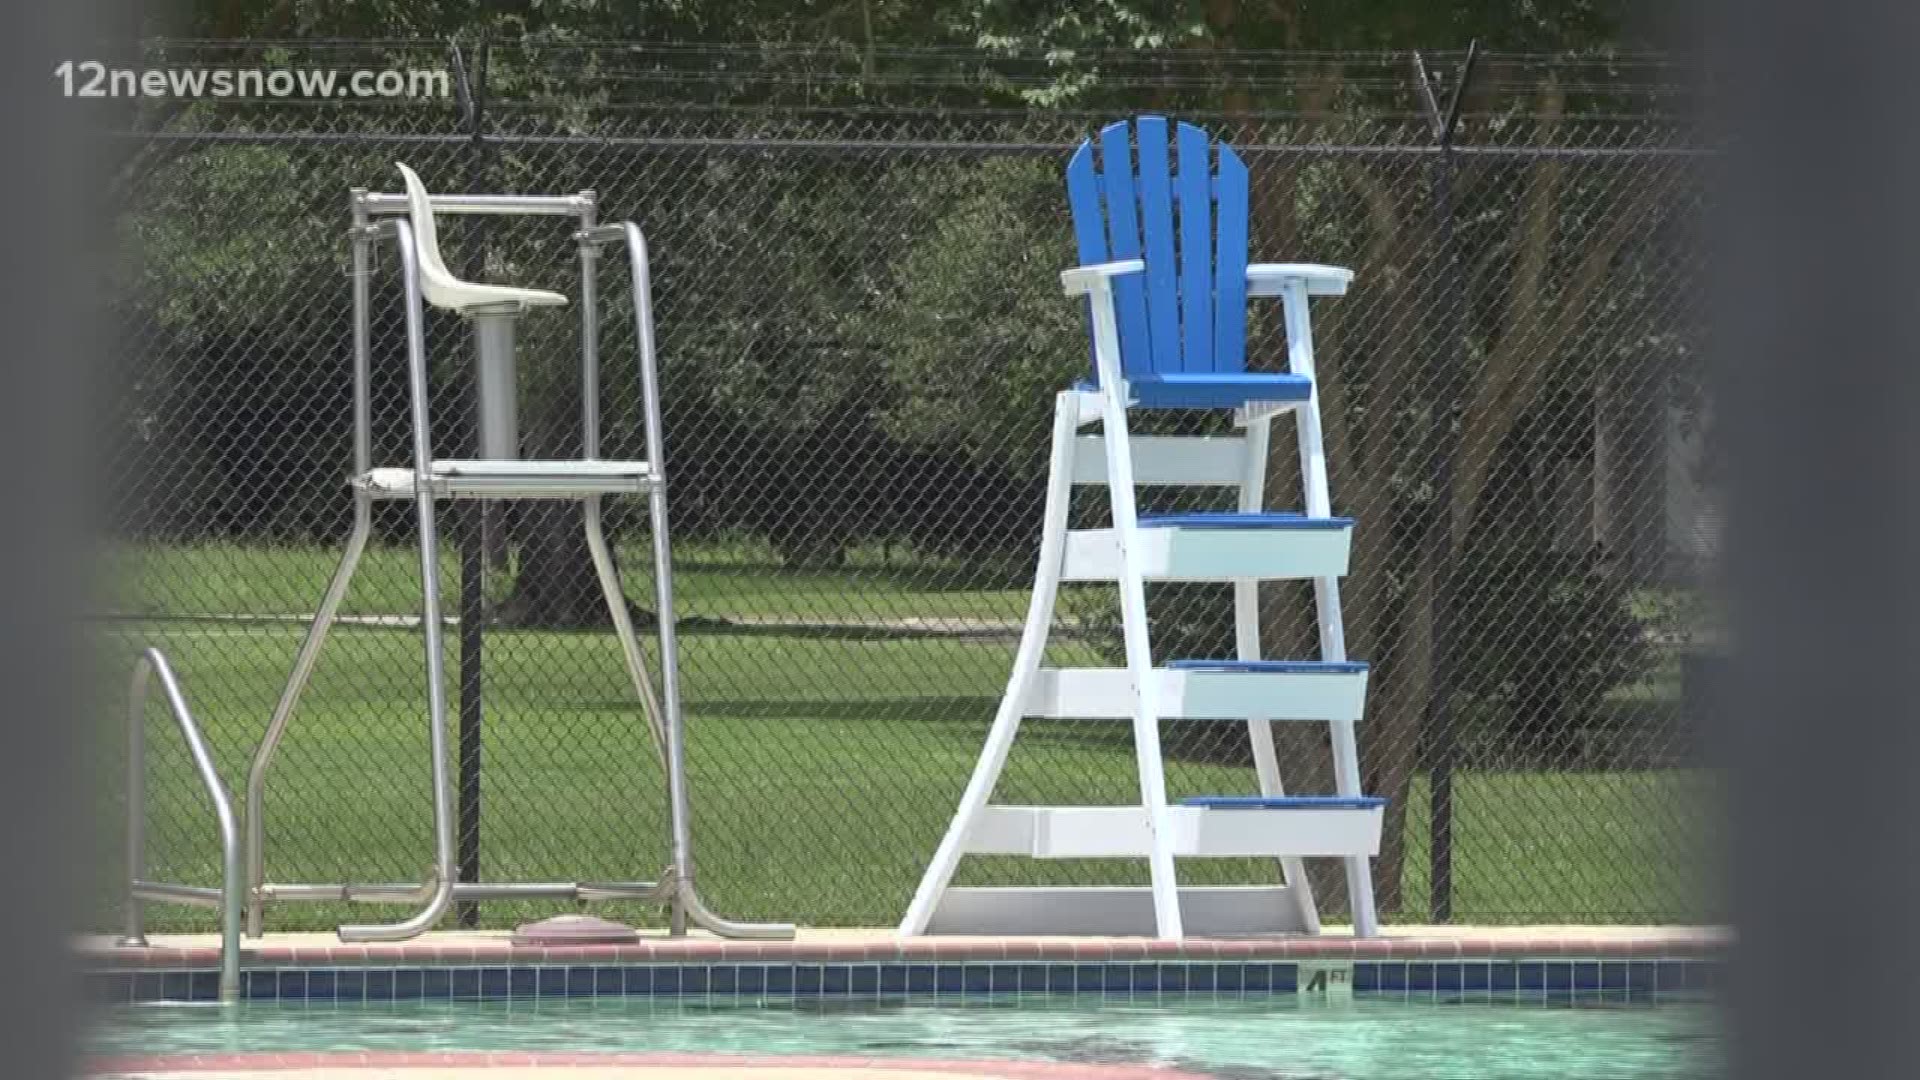 Public pools around Beaumont are closed due to COVID-19 concerns; some across Southeast Texas are opening soon.